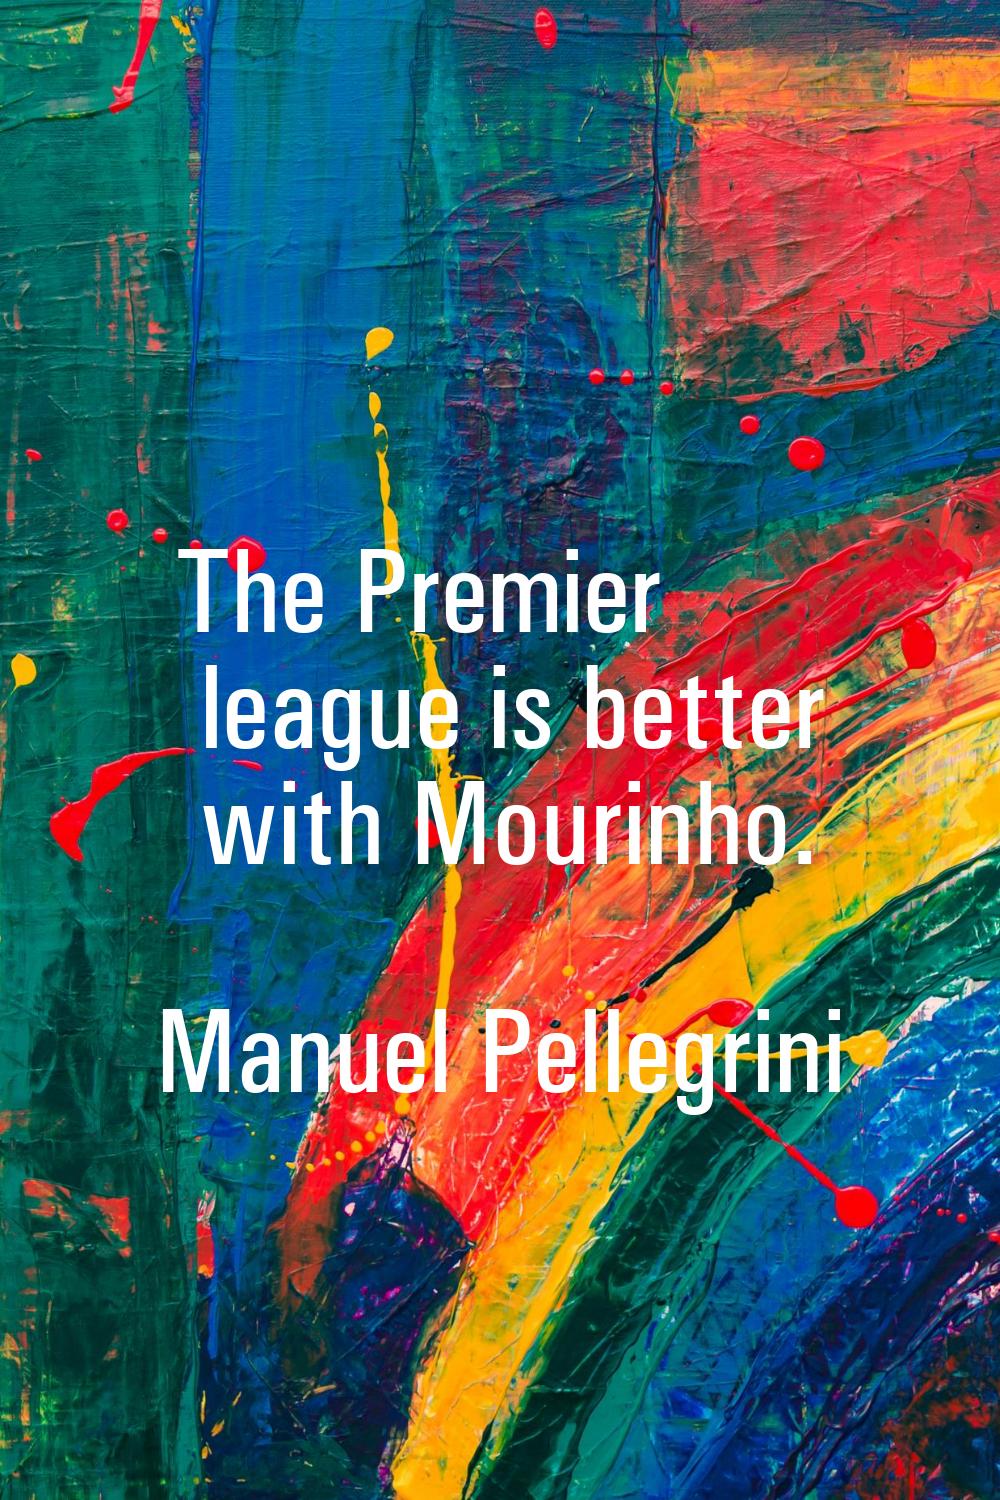 The Premier league is better with Mourinho.